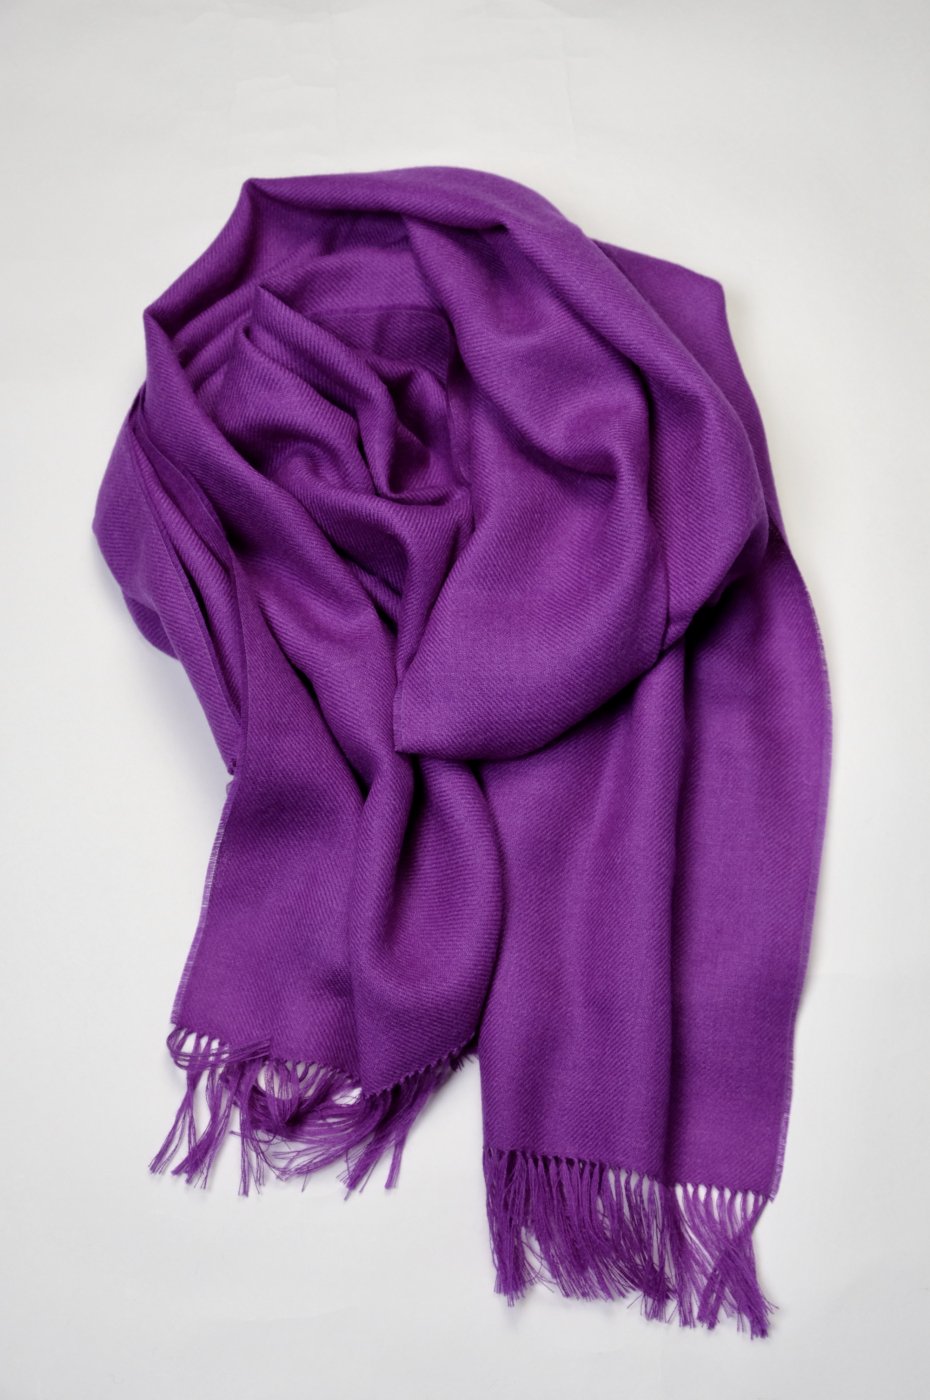 THE INOUE BROTHERS... "NON BRUSHED LARGE STOLE/PURPLE"